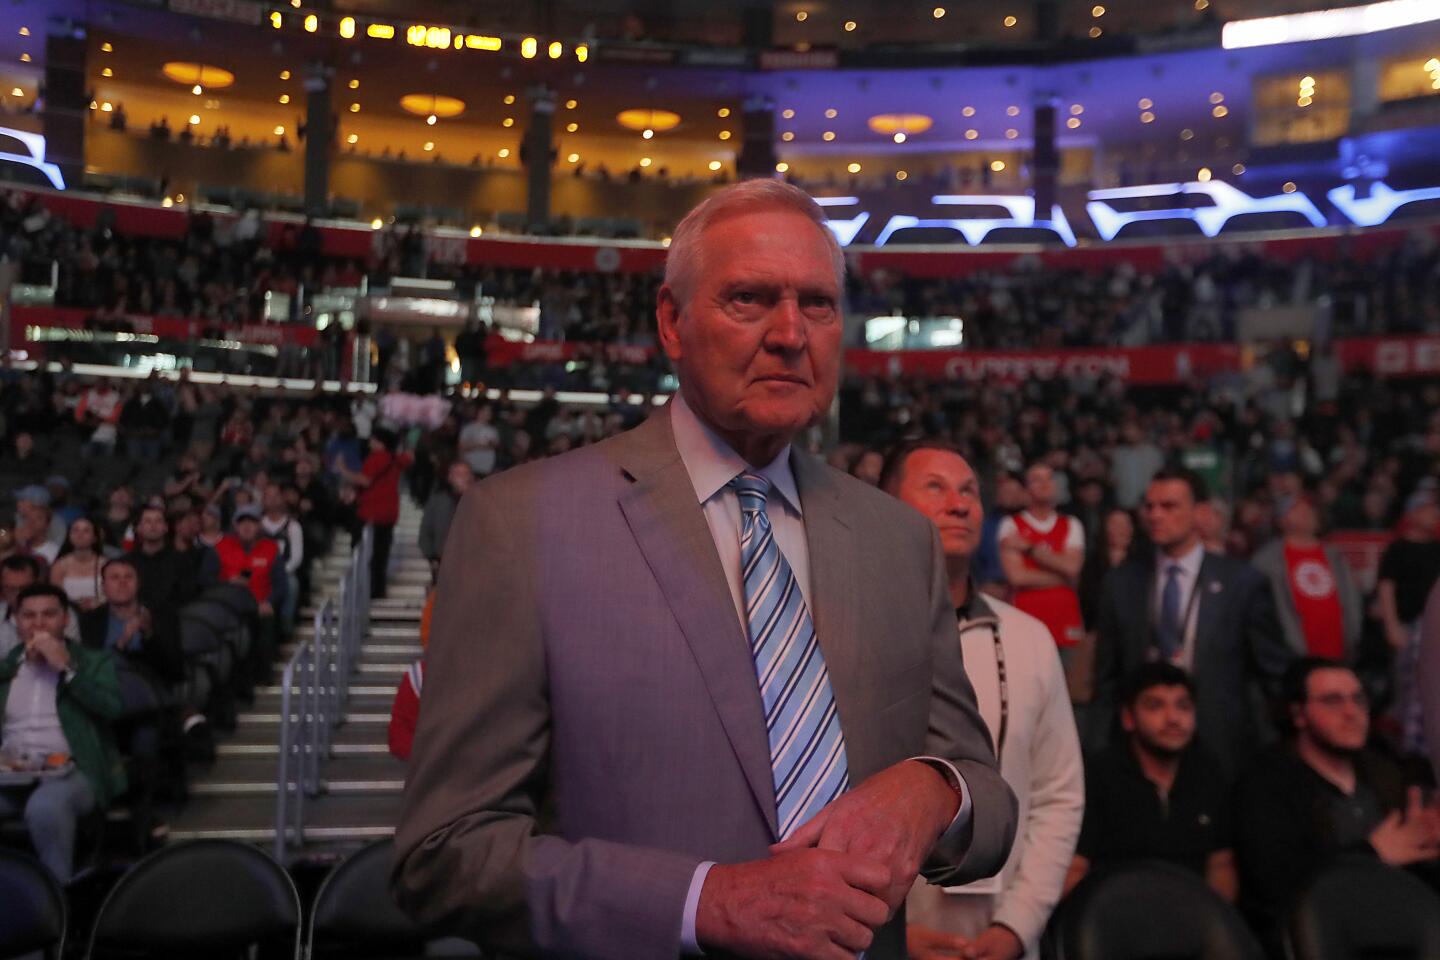 Clippers general manager Jerry West arrives for a game between the Clippers and the Portland Trail Blazers on Tuesday at Staples Center.